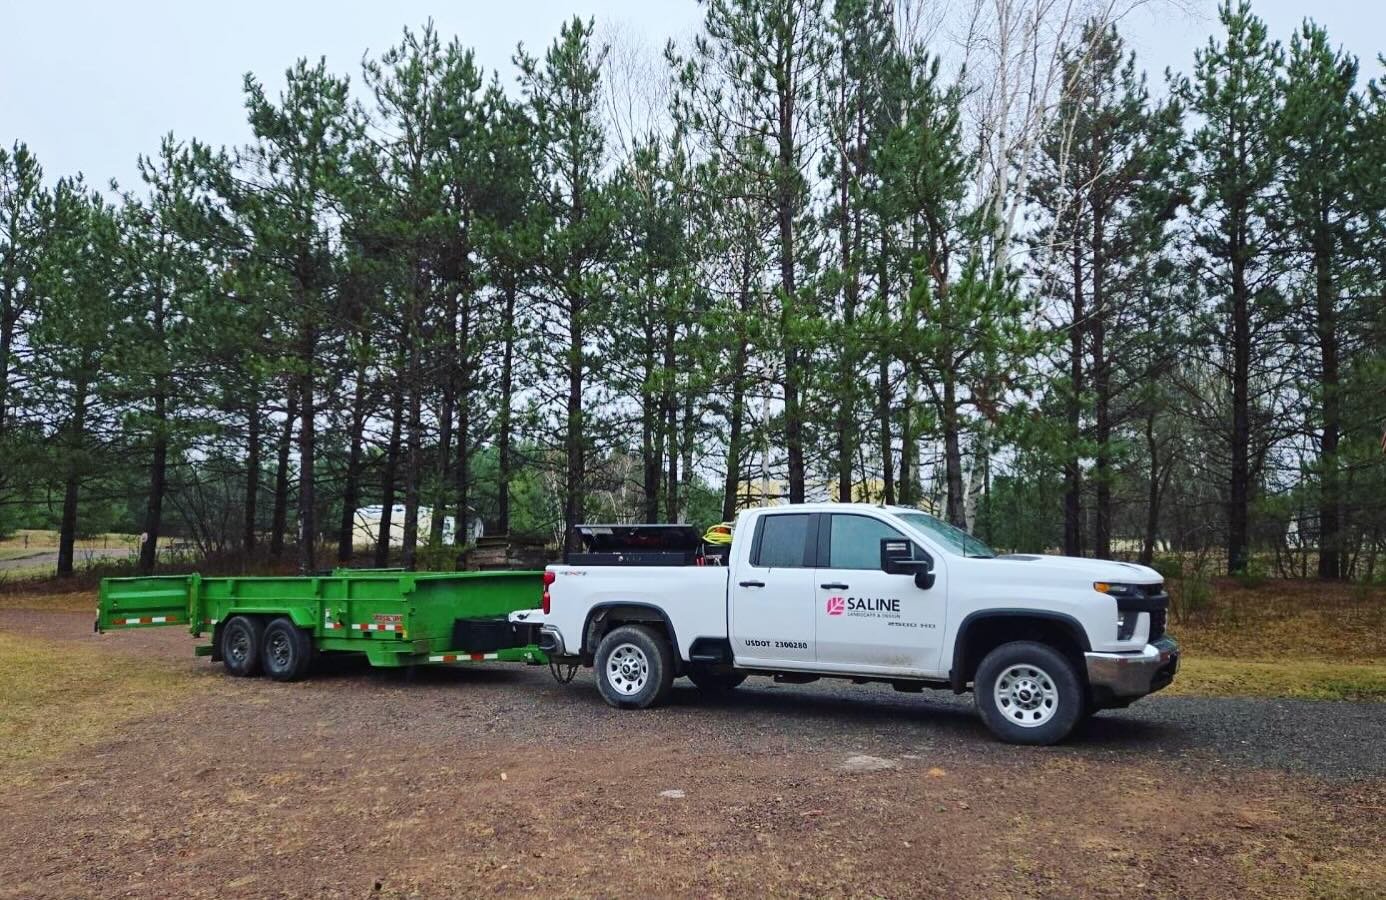 Starting the first jobs of the season this week! 
#landscapeseason #landscapeconstruction